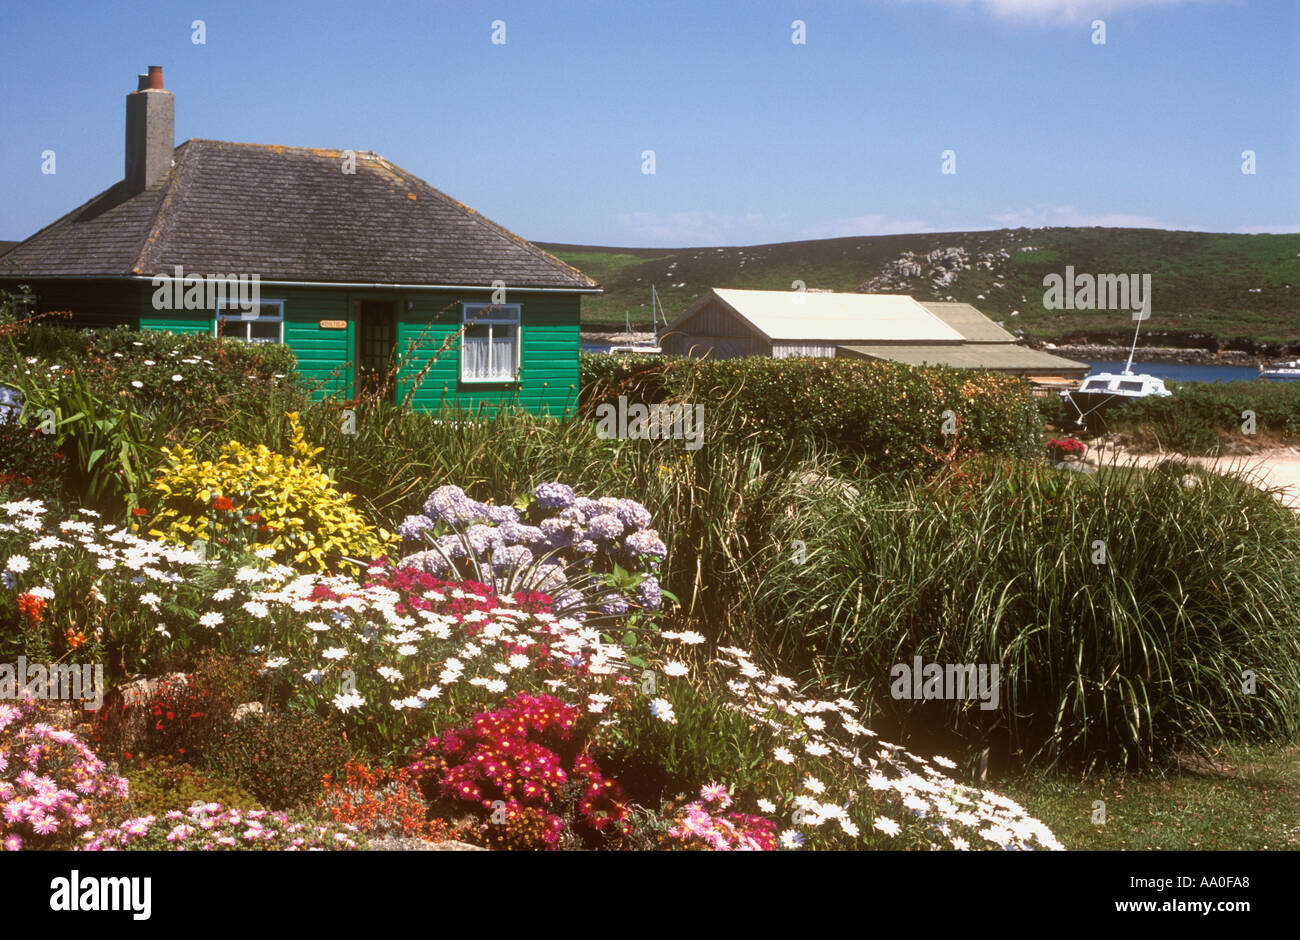 Cottage And Garden On The Island Of Bryher Isles Of Scilly